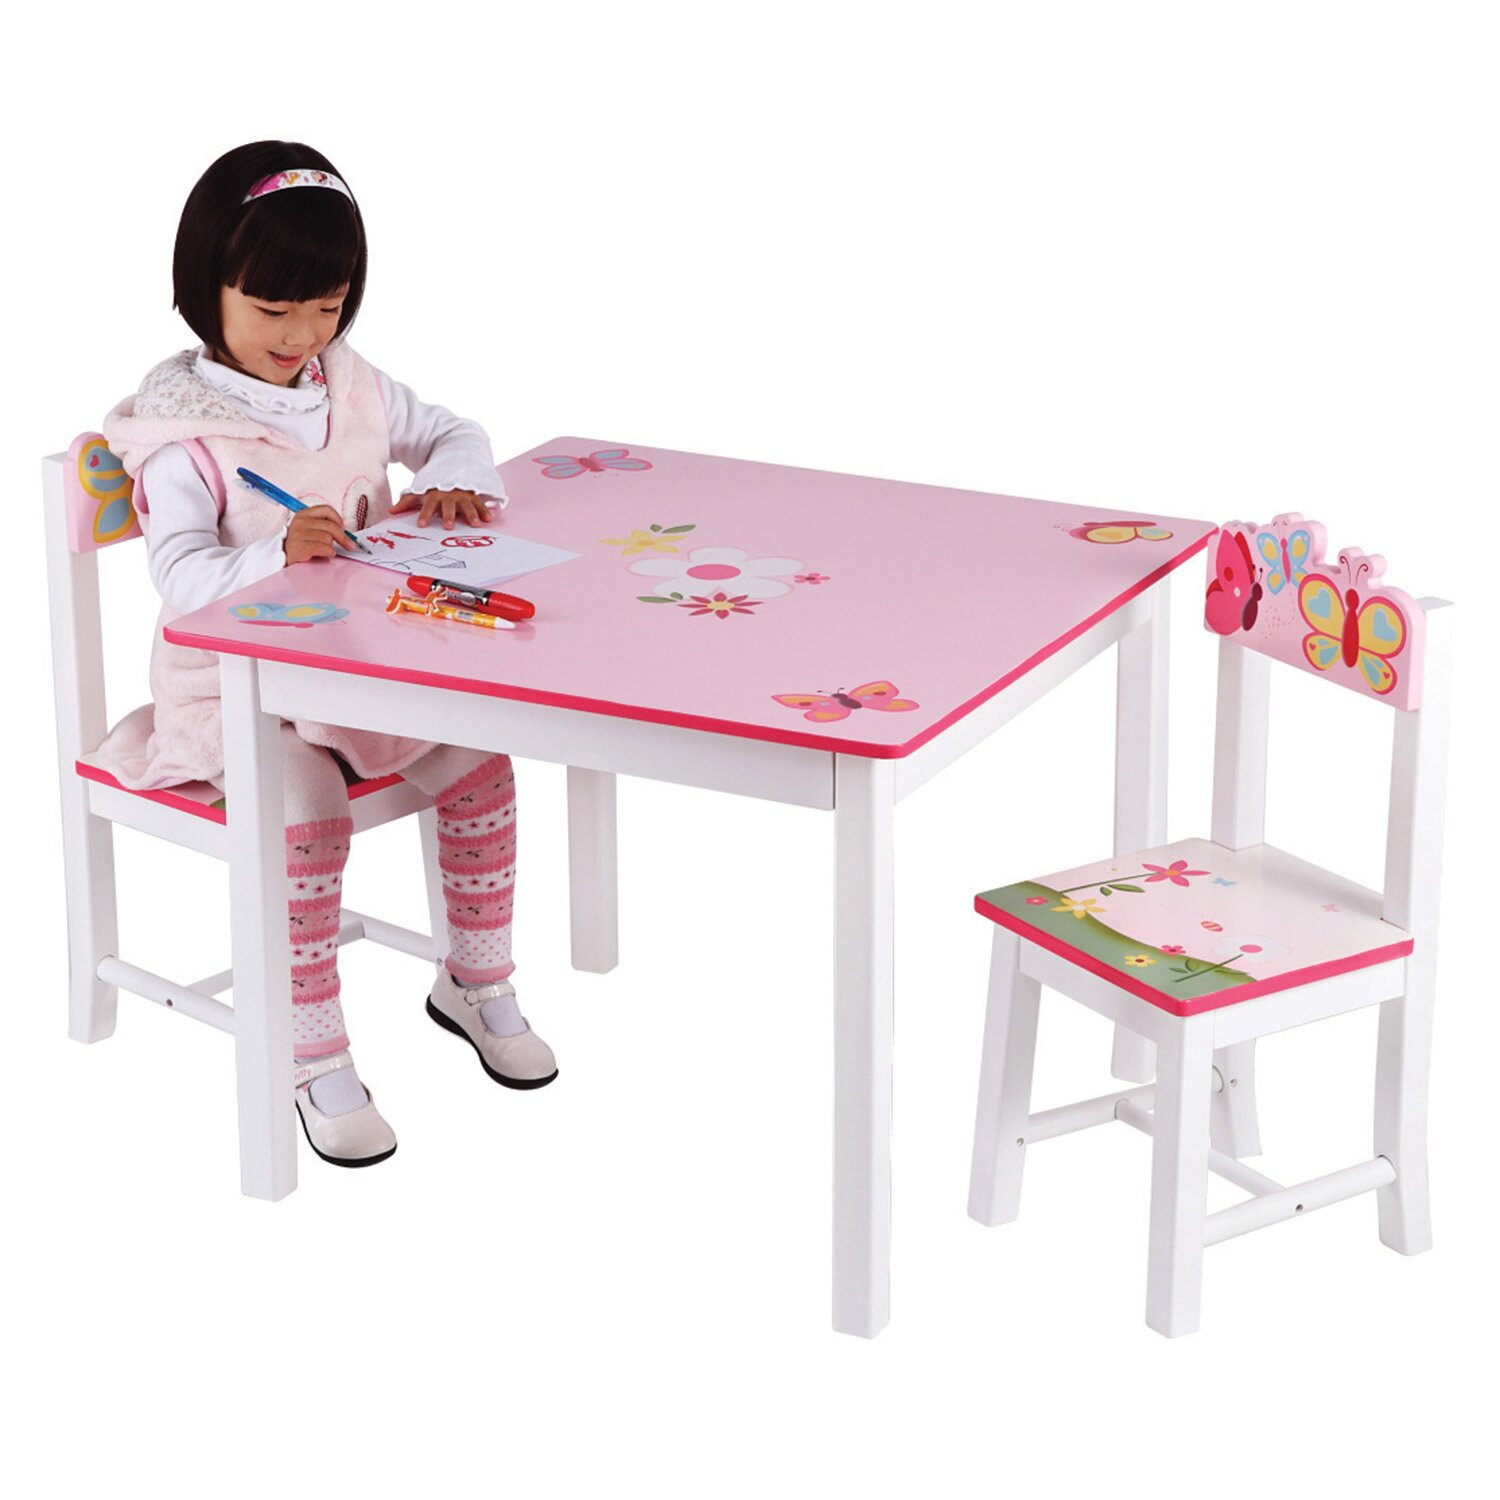 Kids Craft Tables And Chairs
 Guidecraft Butterfly Bud s Kids 3 Piece Table and Chairs